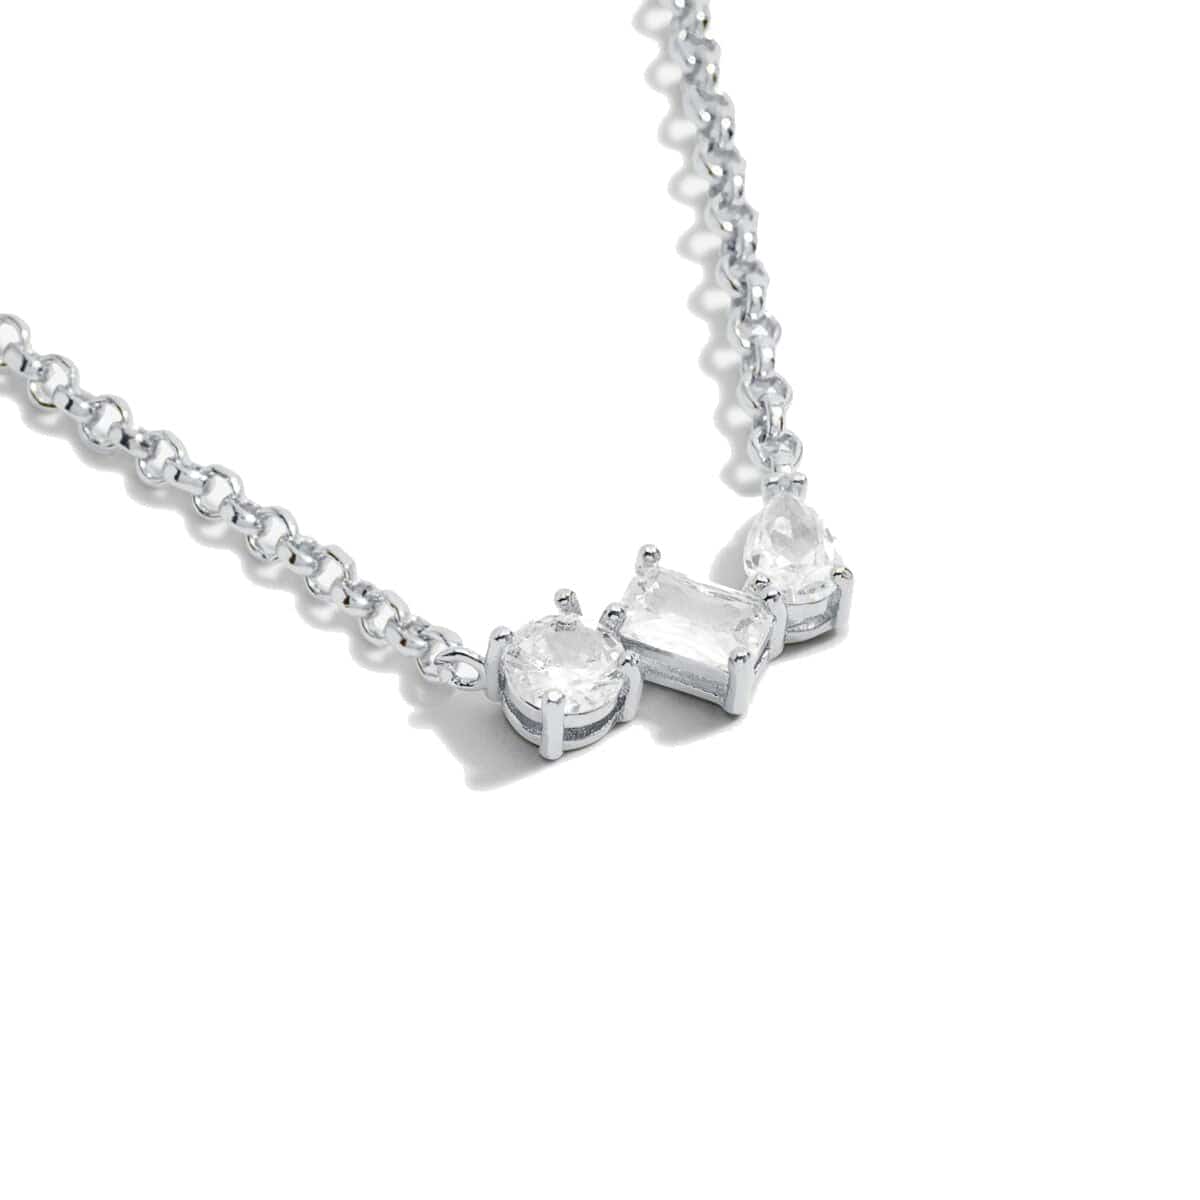 Joma Jewellery Necklace Joma Jewellery Love From Your Little Three Necklace